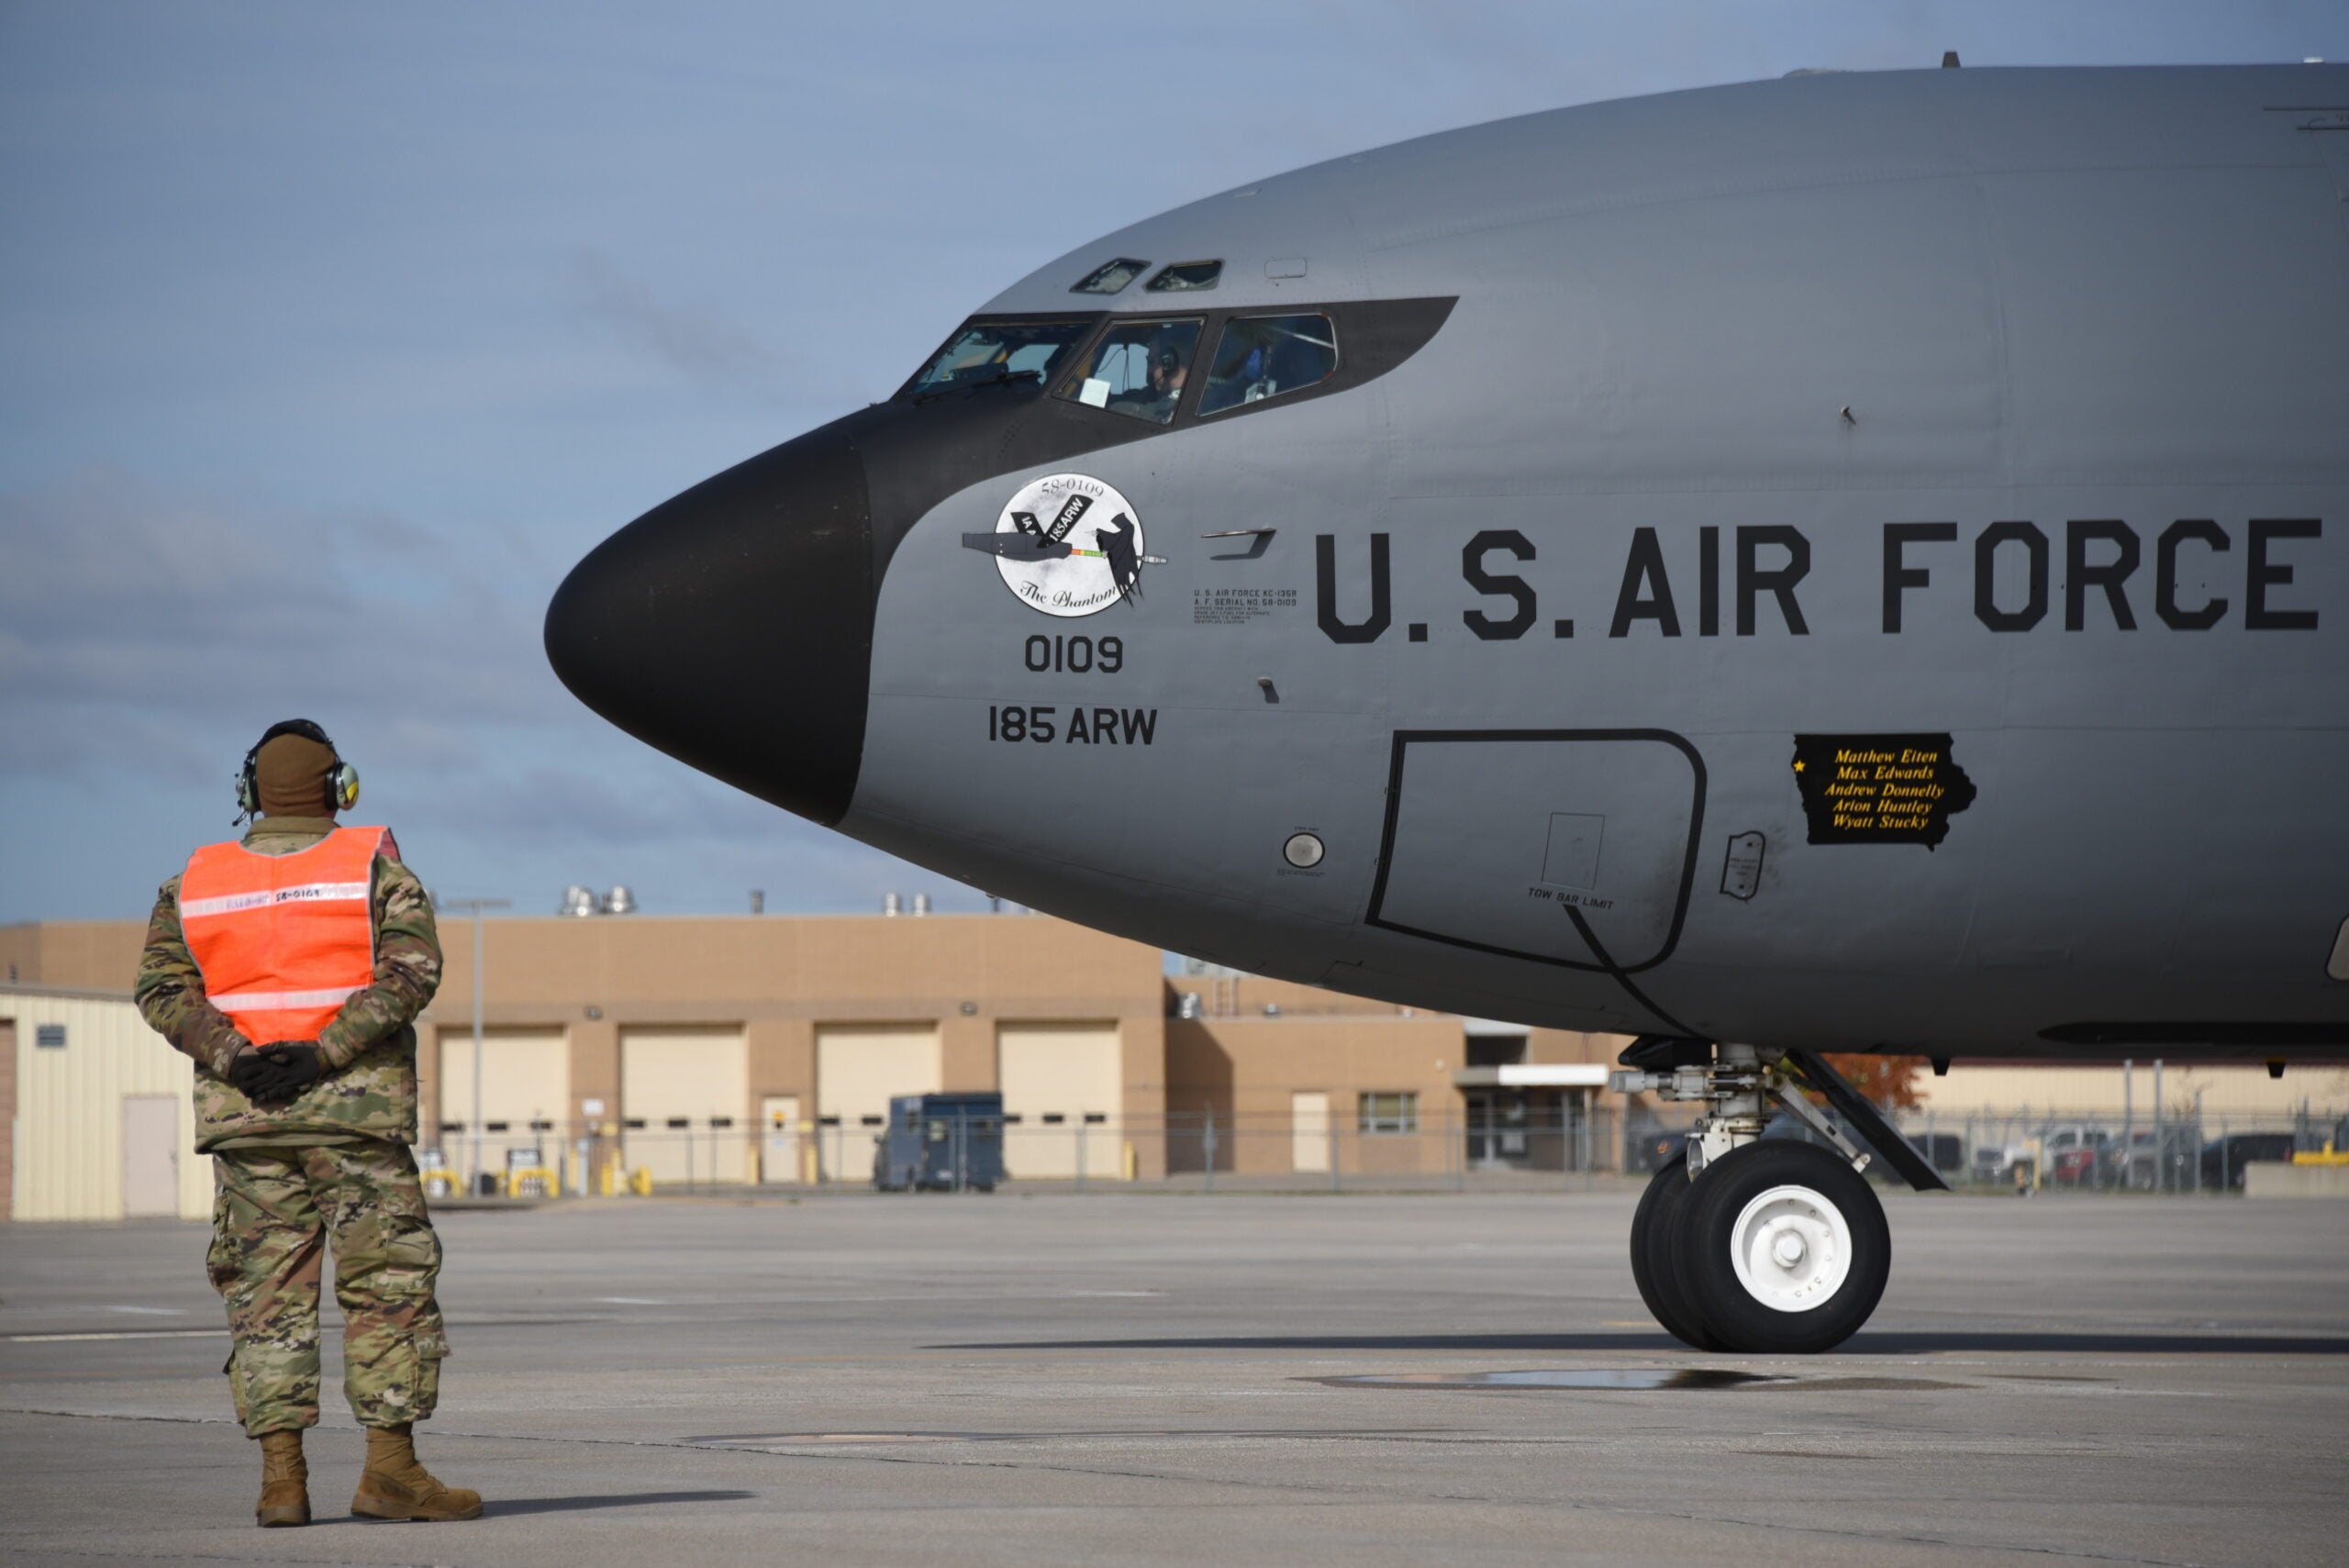 185th Air Refueling Wing Crew Chief Matthew Eiten marshaling U.S. Air Force KC-135 tail 58-109 at the Iowa Air National Guard in Sioux City, Iowa on October 28, 2021. Eiten is the lead crew chief of the Iowa Air National Guard KC-135.

U.S. Air National Guard photo Senior Master Sgt. Vincent De Groot